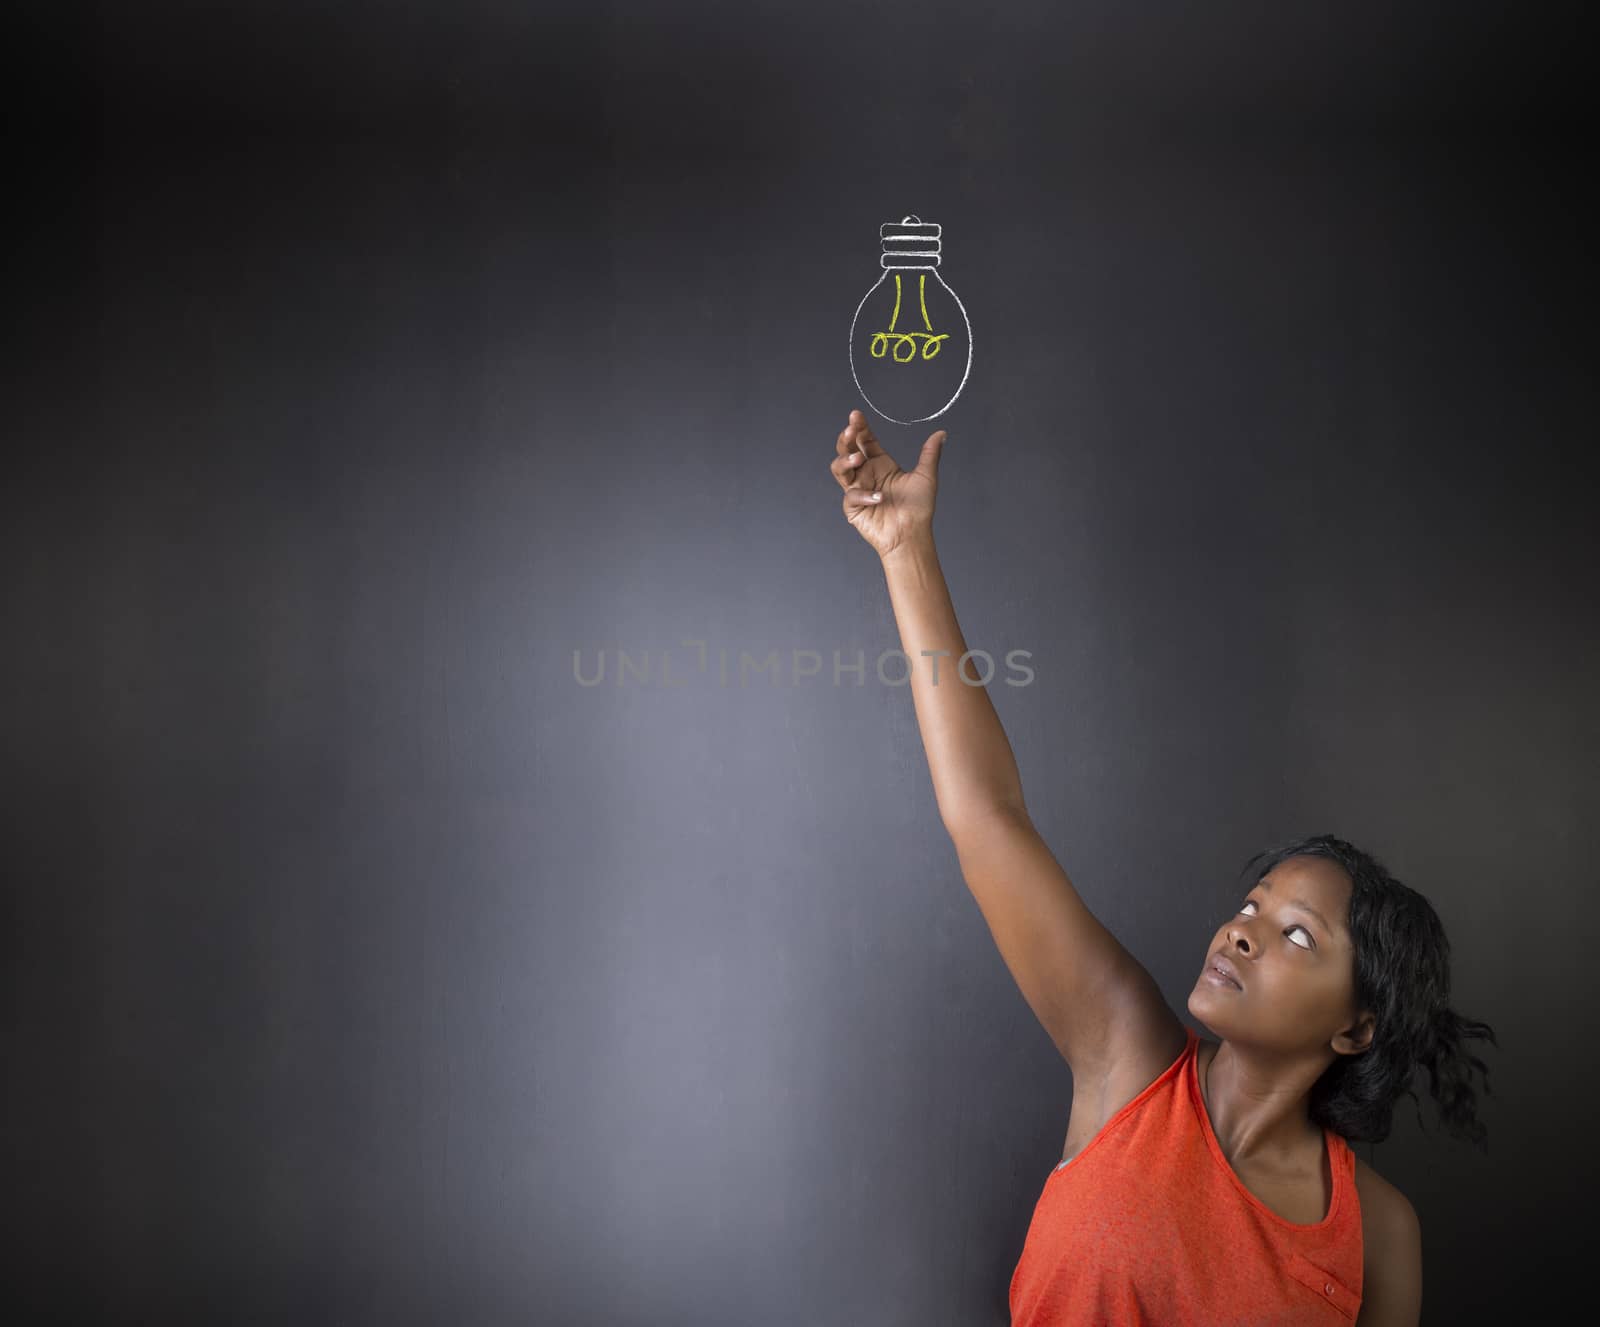 South African or African American woman teacher or student with bright idea blackboard background chalk light bulb thinking